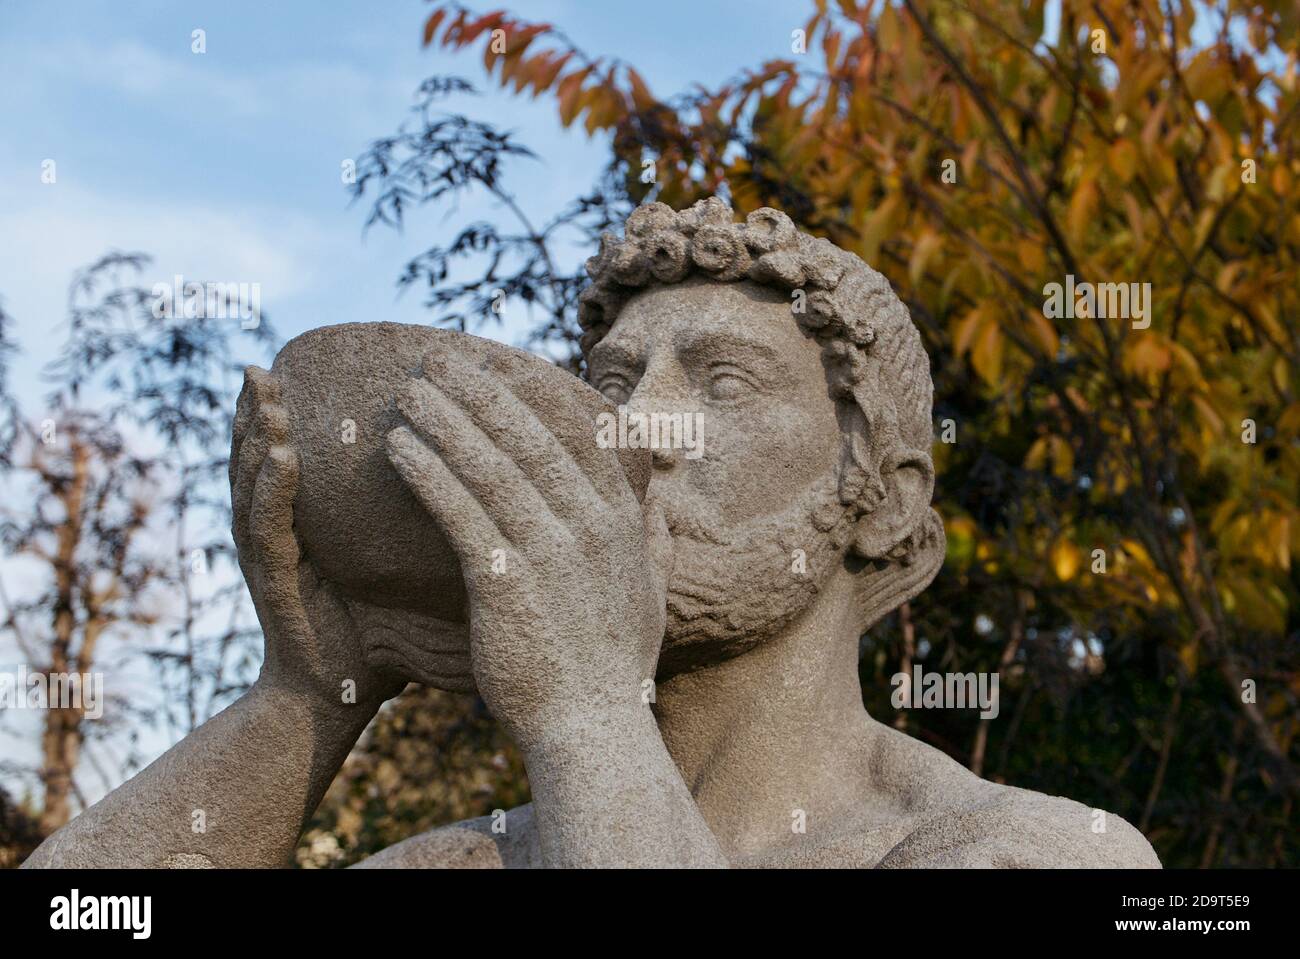 Diogenes drinking from a bowl sculpture from Greek mythology. Statue was created by artist Mark Batten. Located within Hampstead Heath, London. Stock Photo